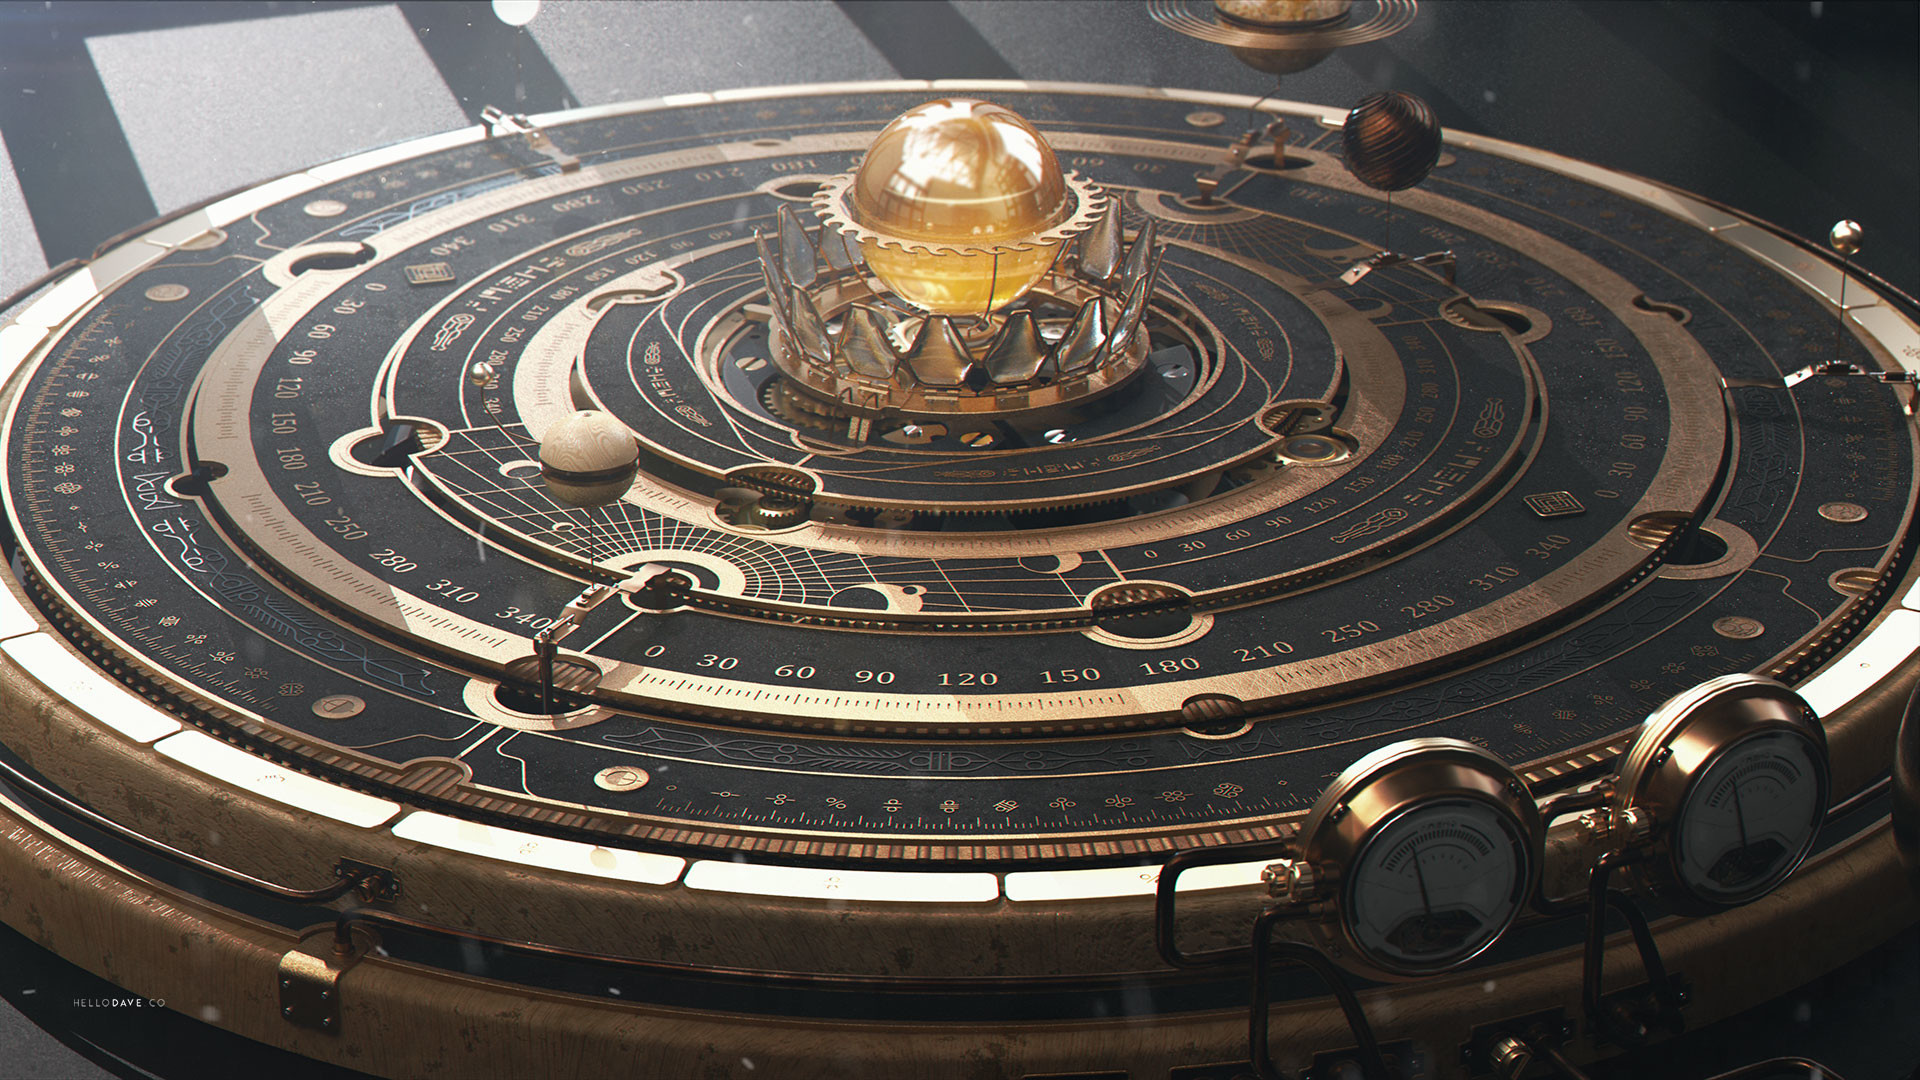 General Astrolabe Steampunk Pla Astronomy Orrery